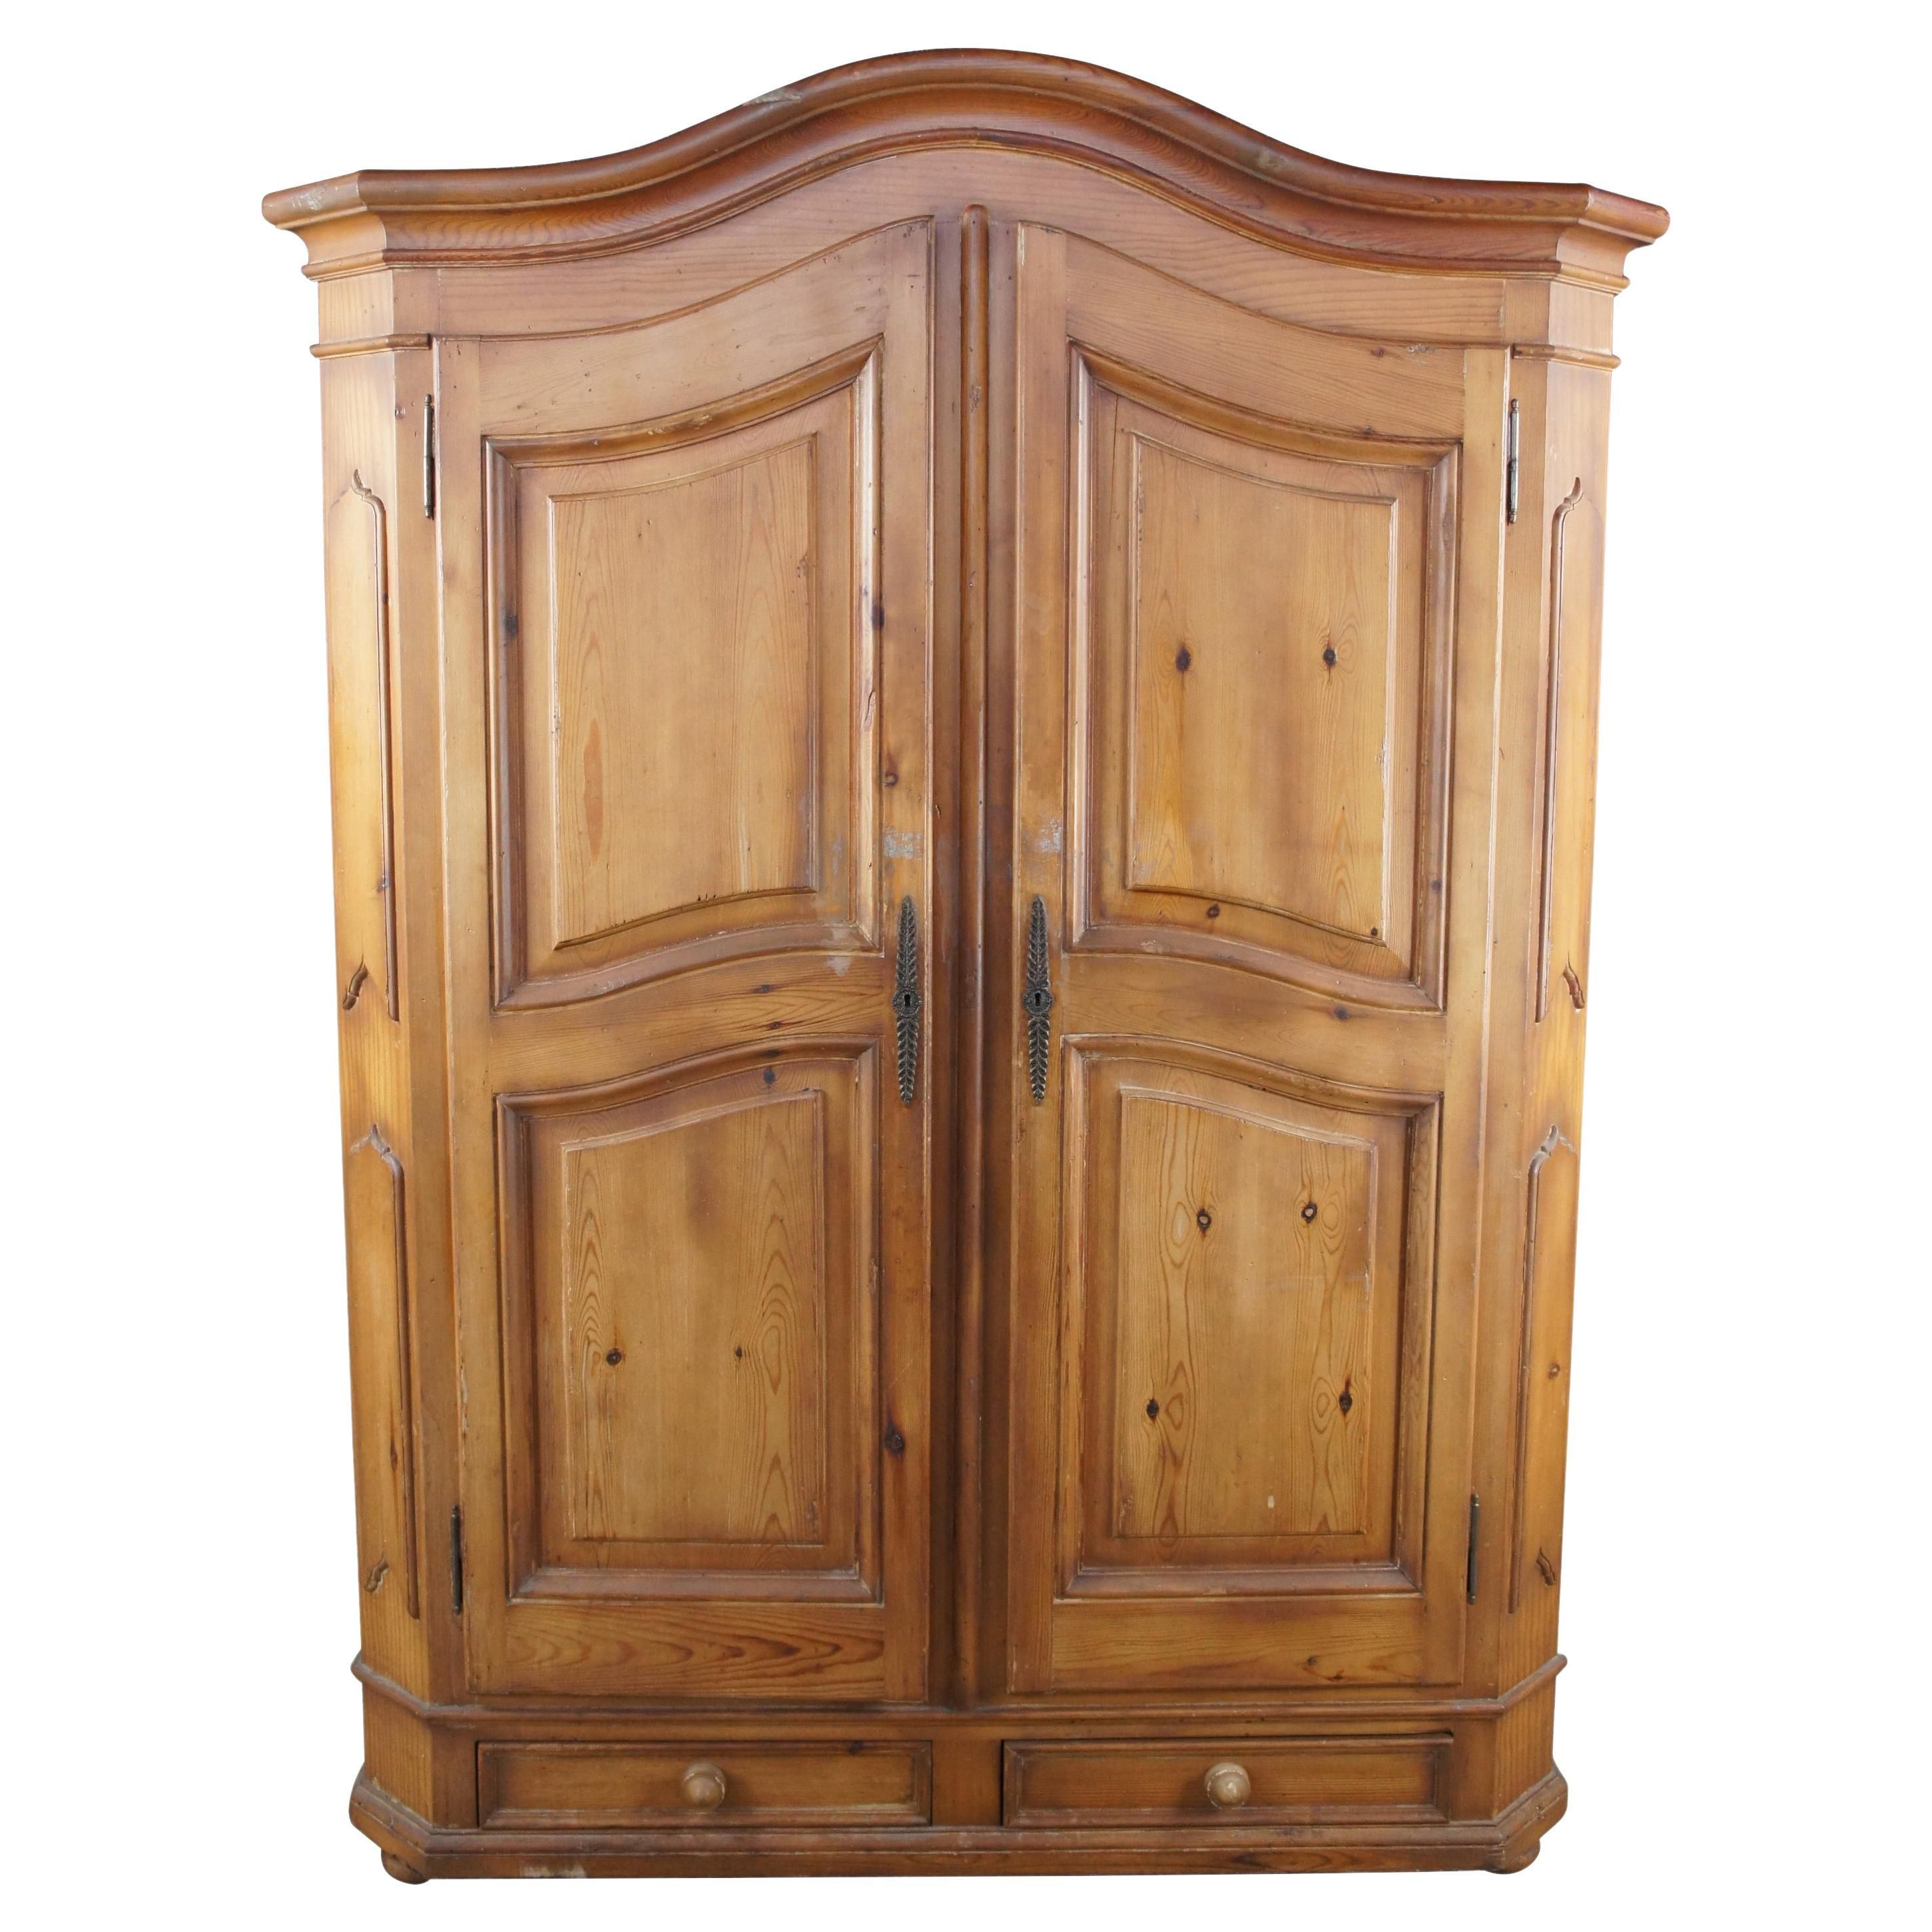 Antique Armoire With Carved Details For Sale At 1stdibs | Vintage Armoire,  Antique Armoires, Antique Wardrobe Closet In Antique Style Wardrobes (View 9 of 15)